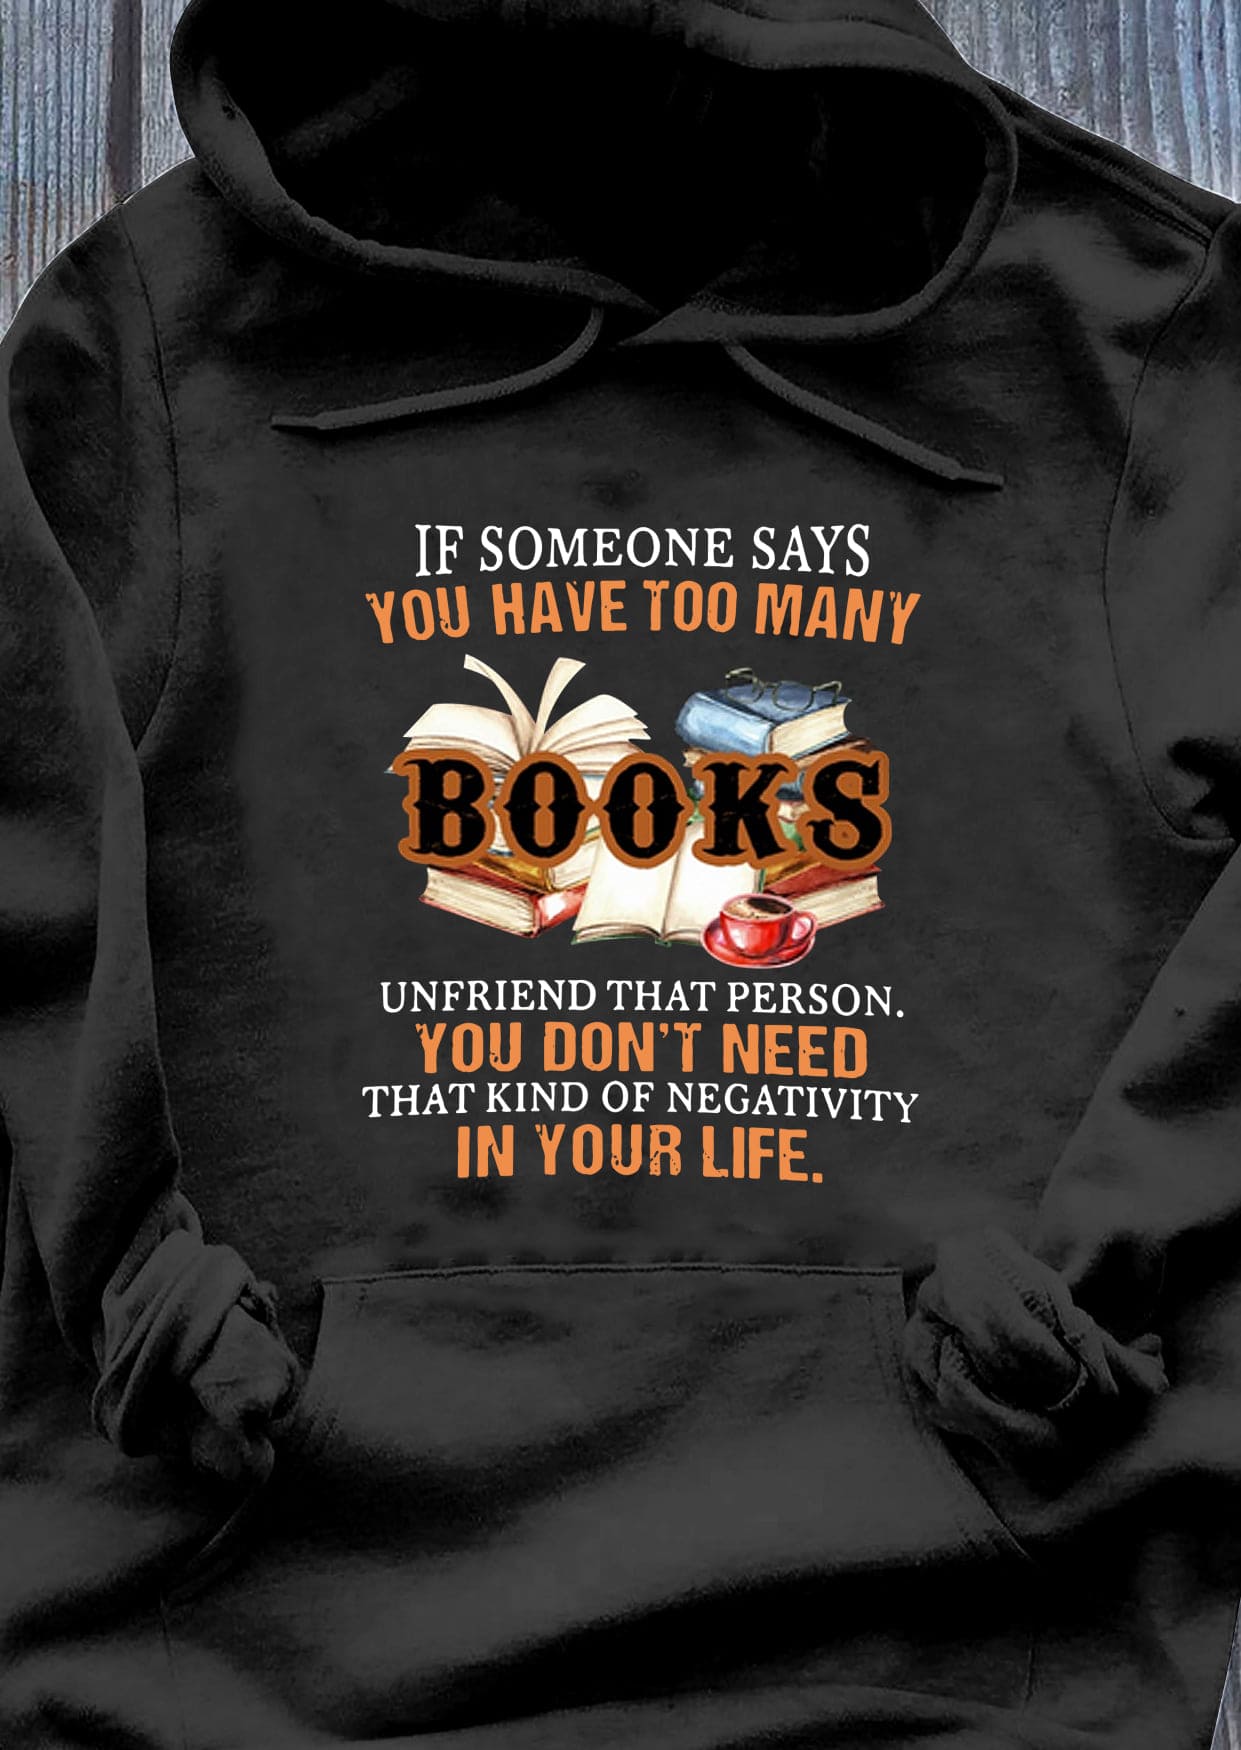 If someone says you have too many books unfriend that person - Life with book, gift for book person